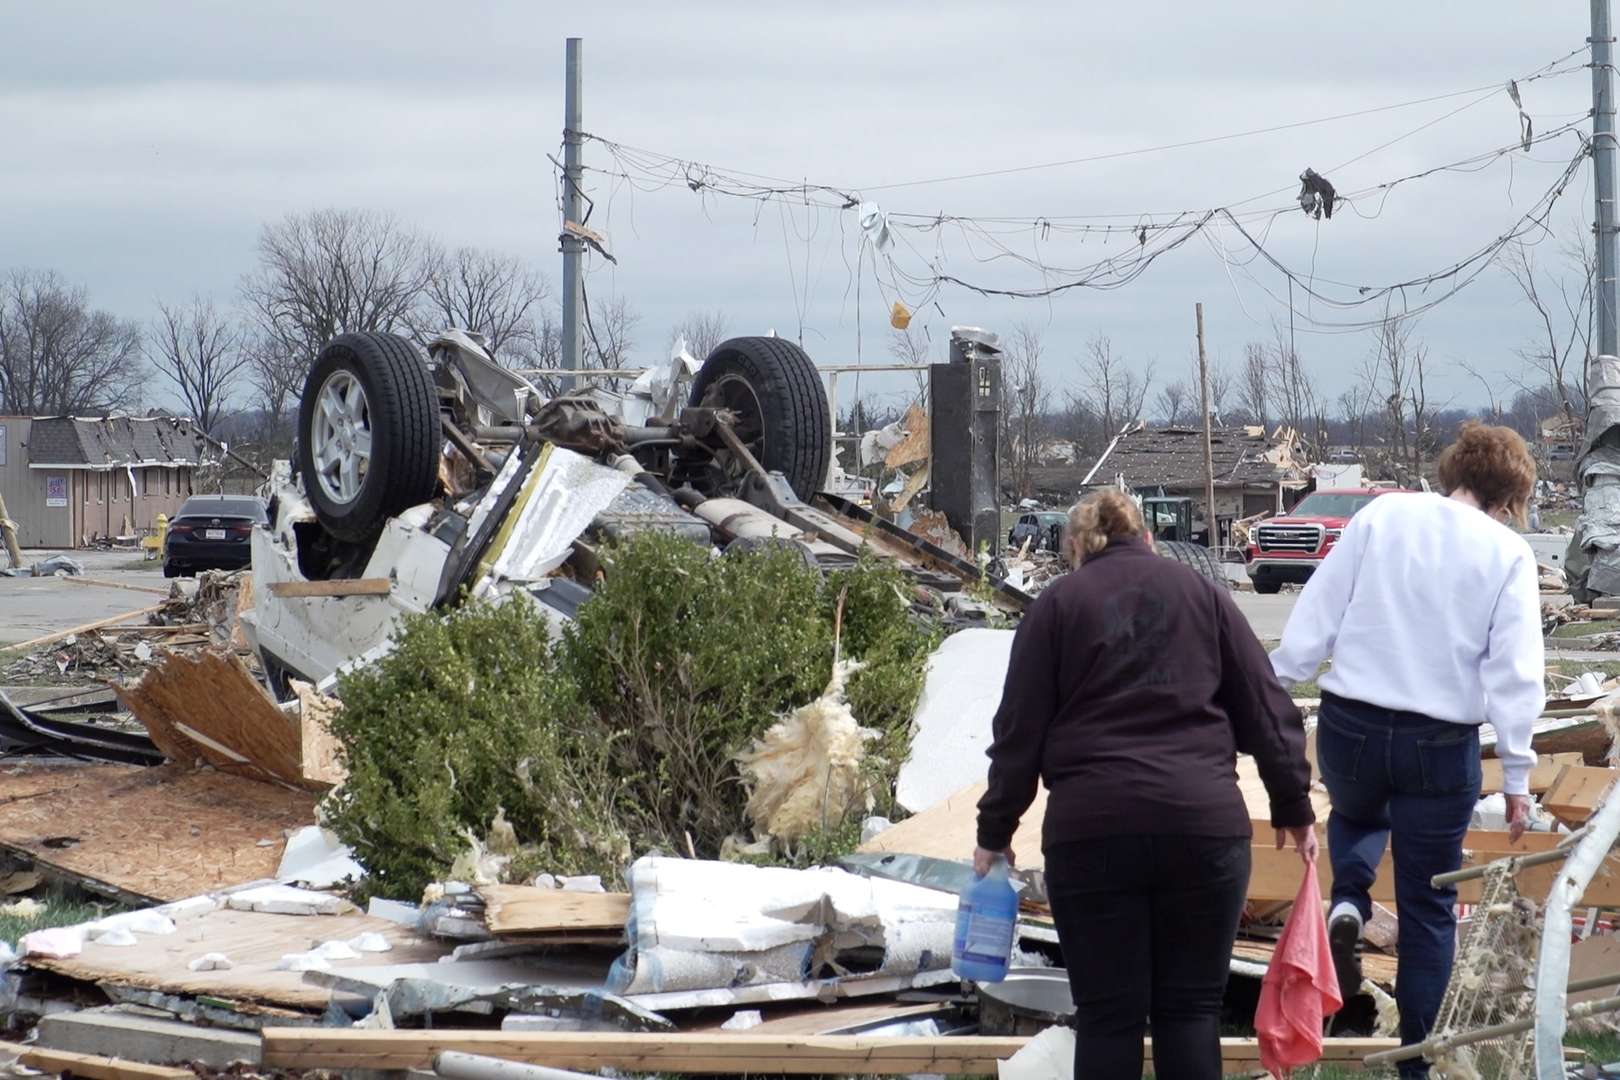 Two people carefully make their way through the debris of the former Taco Bell. The powerlines above them are littered with cords and trash tangled in the wires by the tornado.